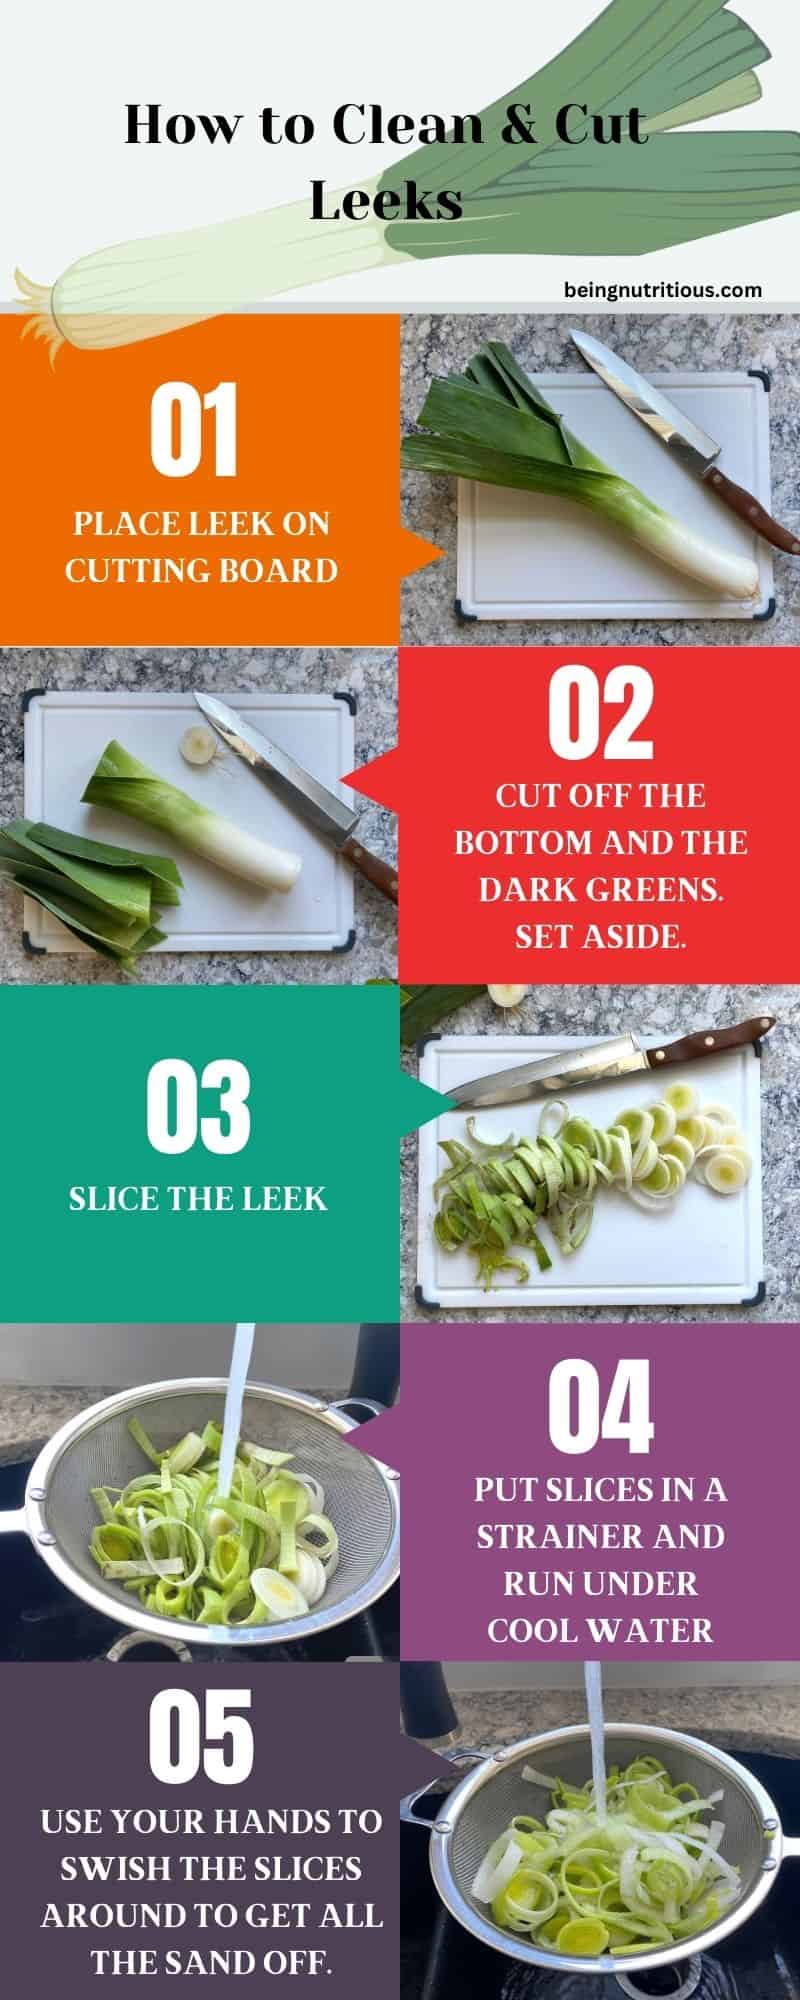 Infographic showing how to clean and cut leeks. Step 1: place the leek on a cutting board. Step 2: Cut off the bottom and the dark greens and set them aside. Step 3: Slice the leek. Step 4: Put the slices in a strainer, and run under cool water. Step 5: Use your hands to swish the slices around to get all the sand off.